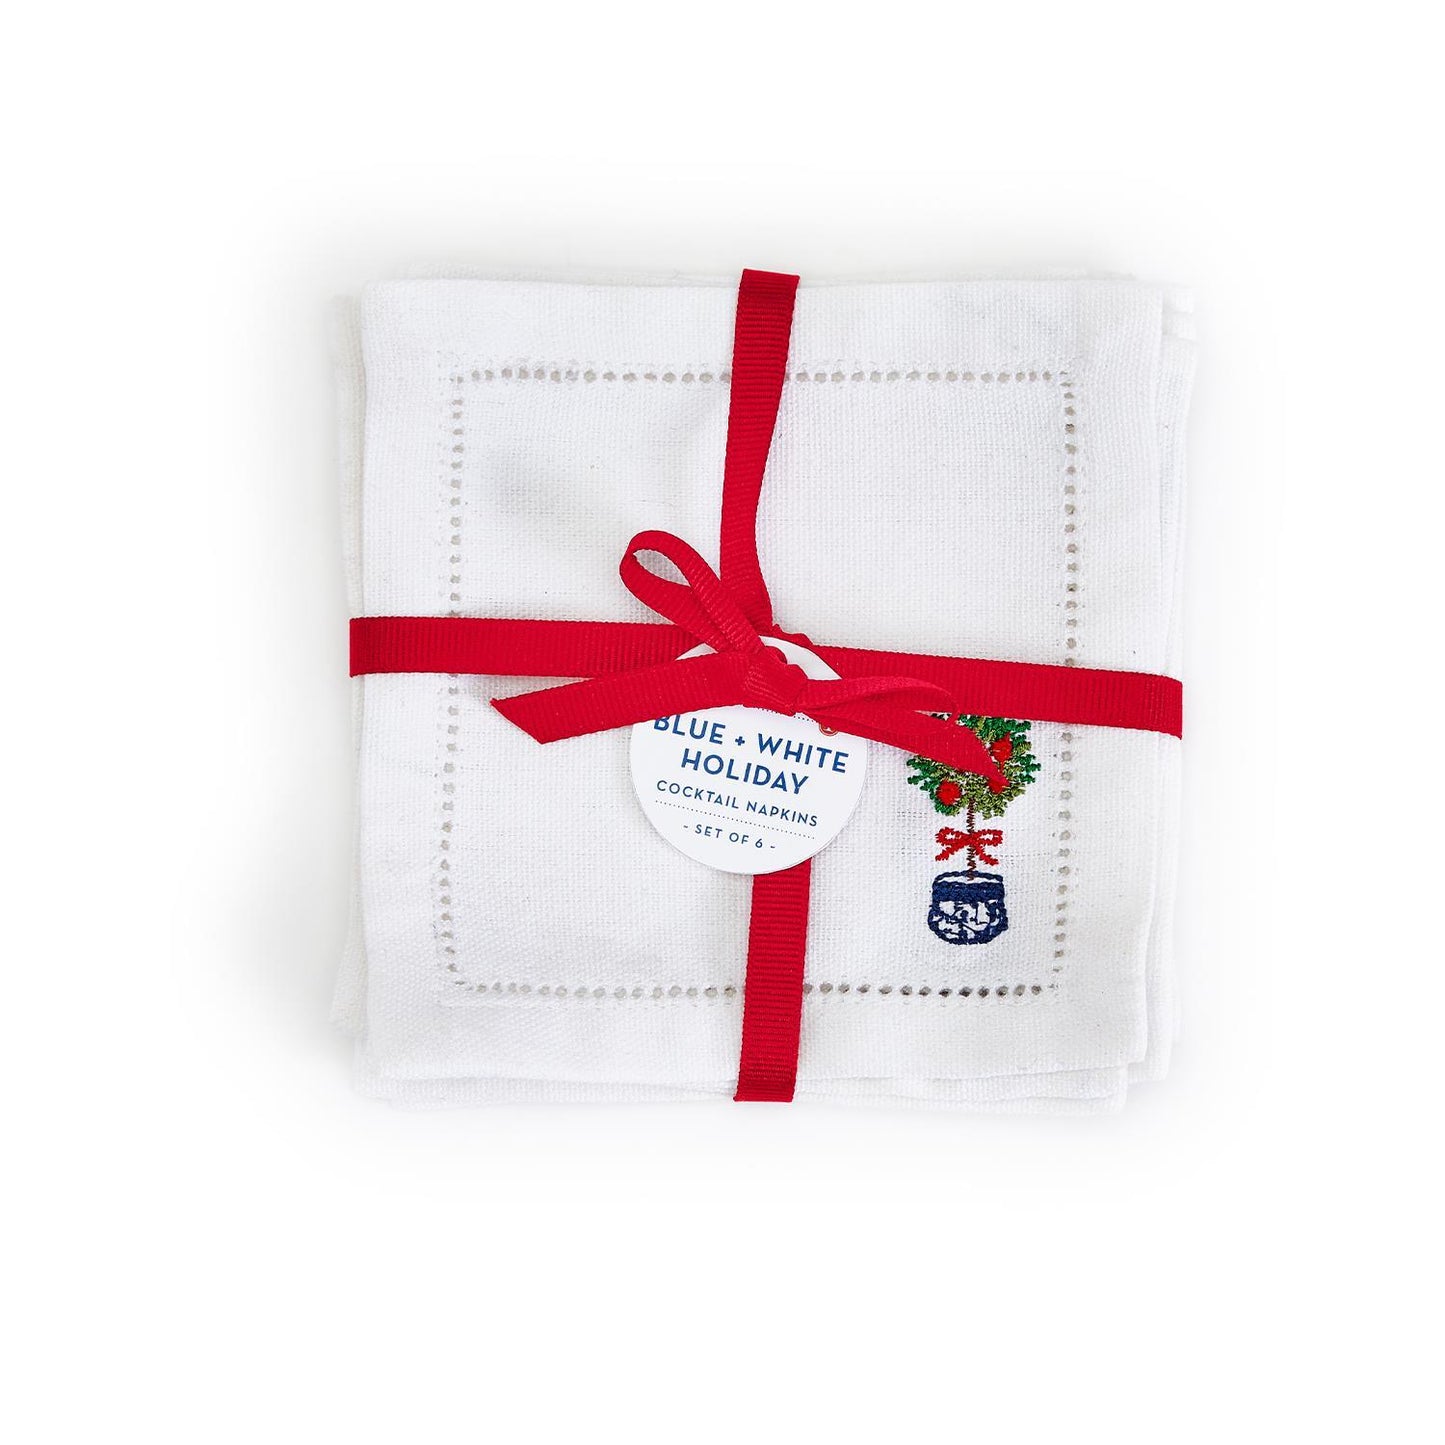 Blue and White Set of 6 Holiday Cocktail Embroidered Napkin